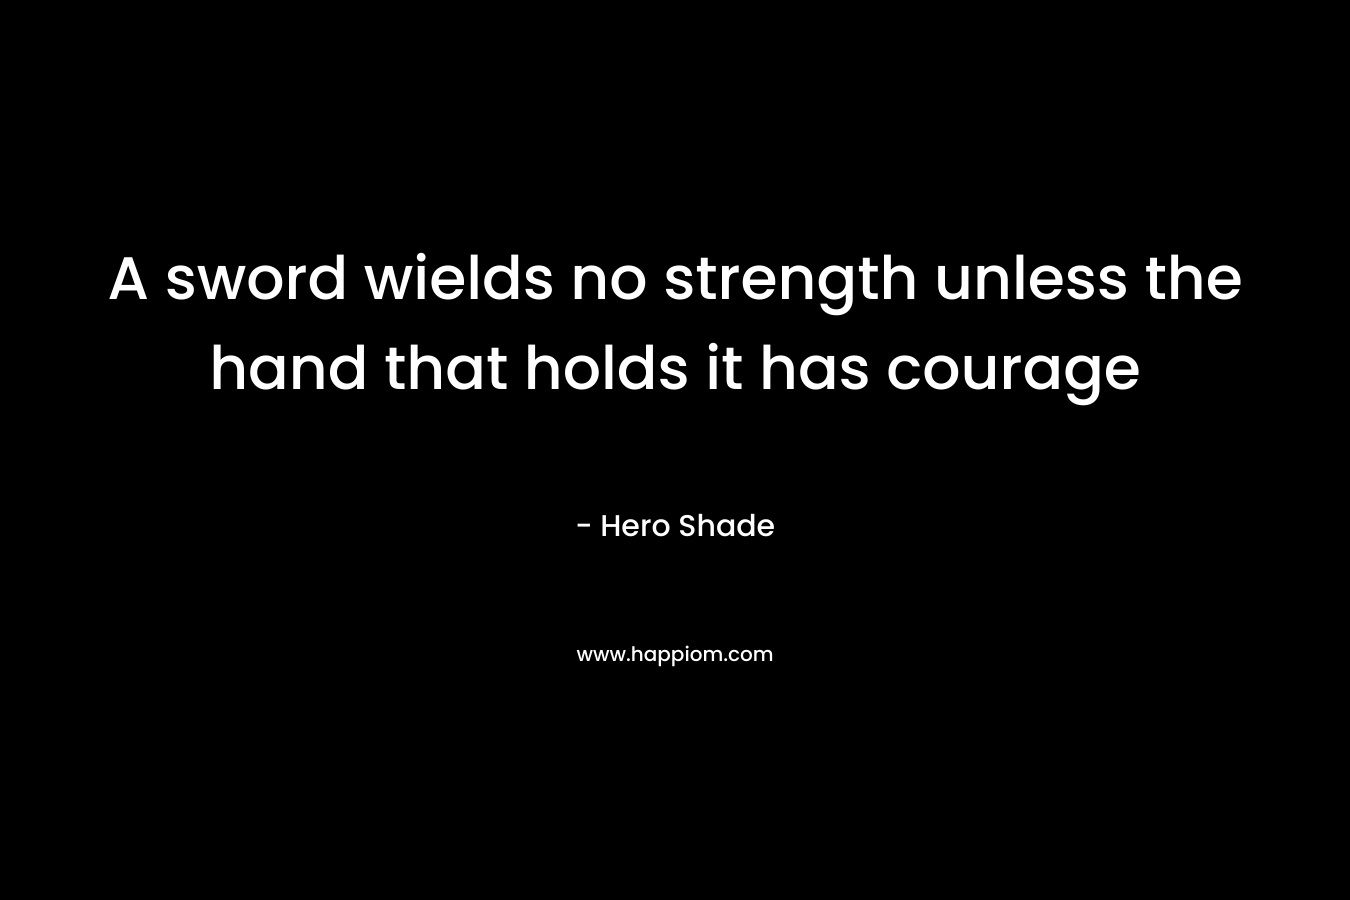 A sword wields no strength unless the hand that holds it has courage